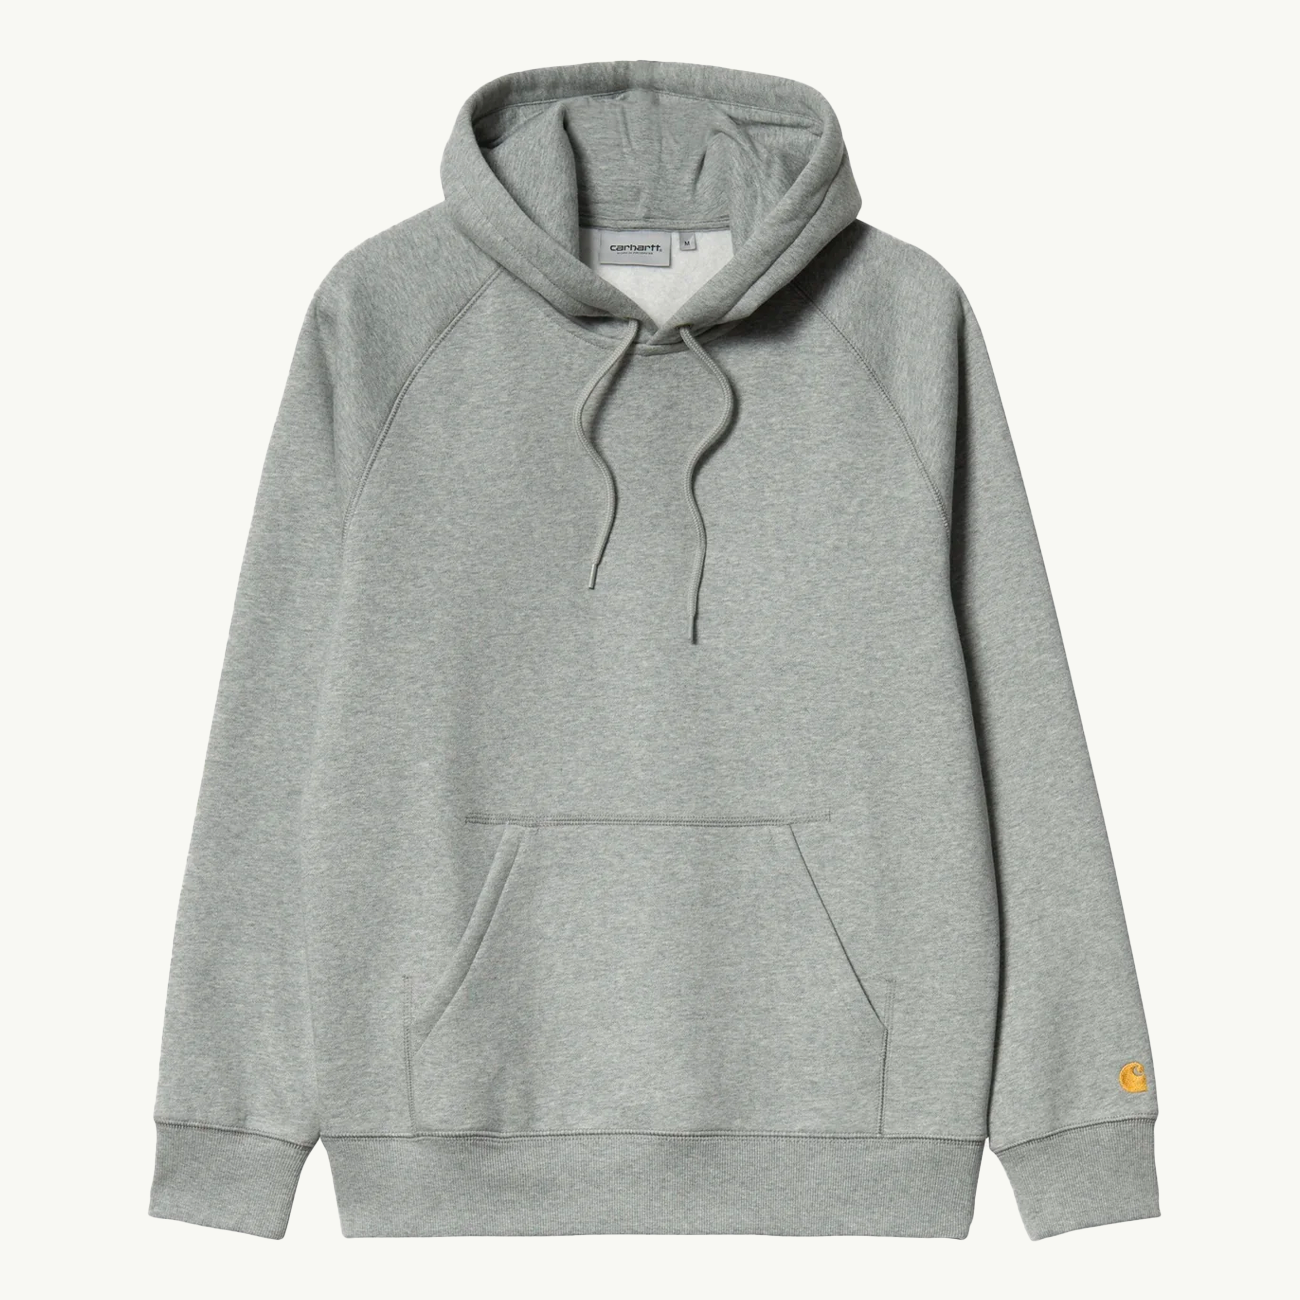 Chase Hooded Sweat - Grey Heather/Gold